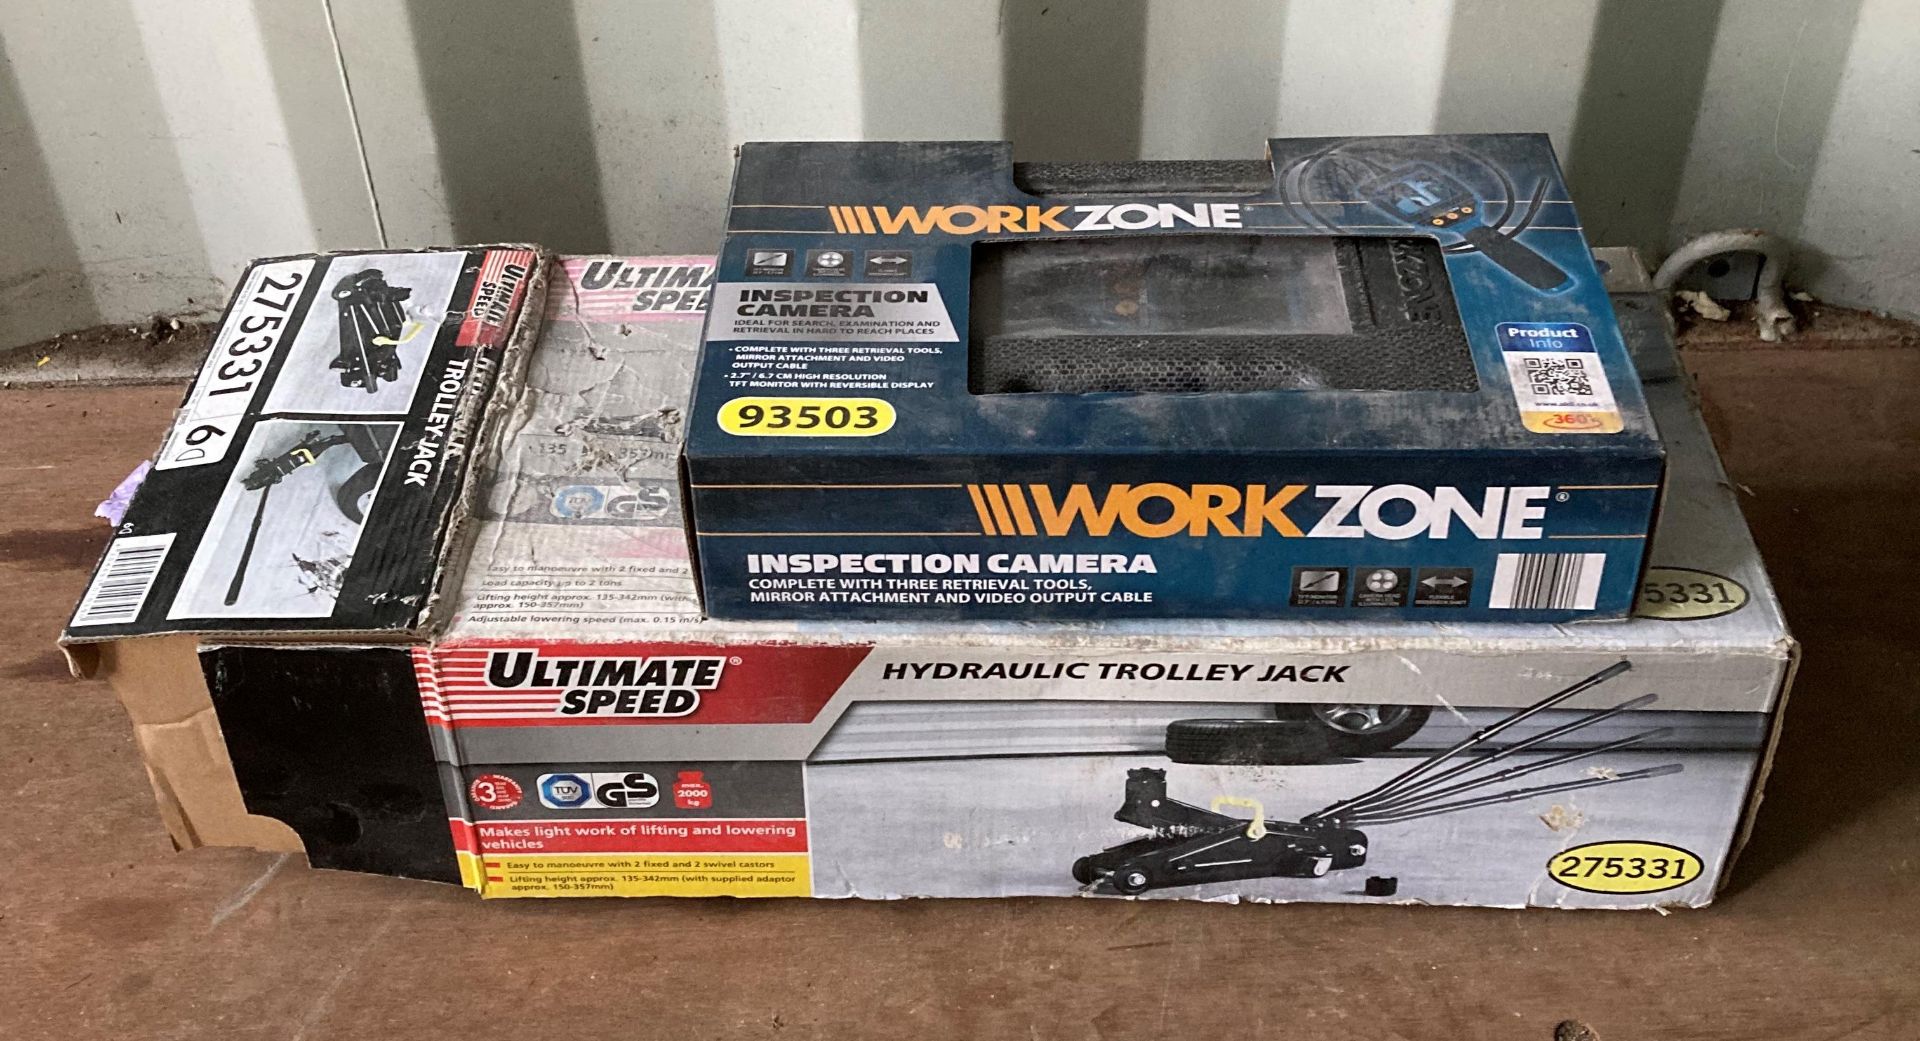 WORKZONE inspection camera and a Climate speed hydraulic 2 ton trolley jack in box (new) (Saleroom